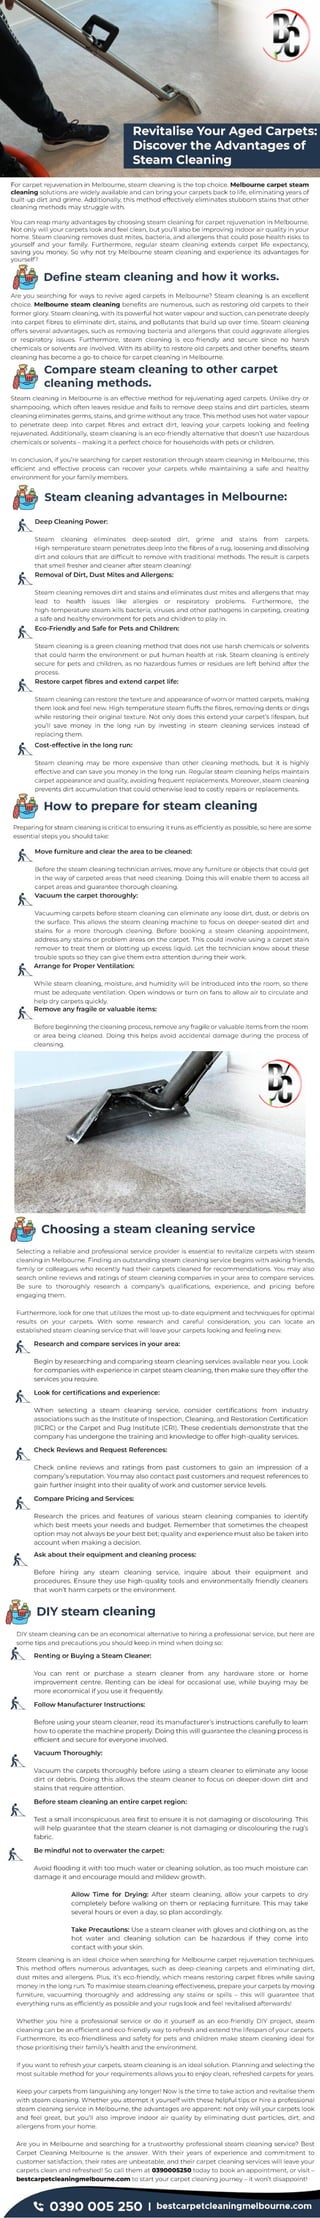 Revitalise Your Aged Carpets: Discover the Advantages of Steam Cleaning